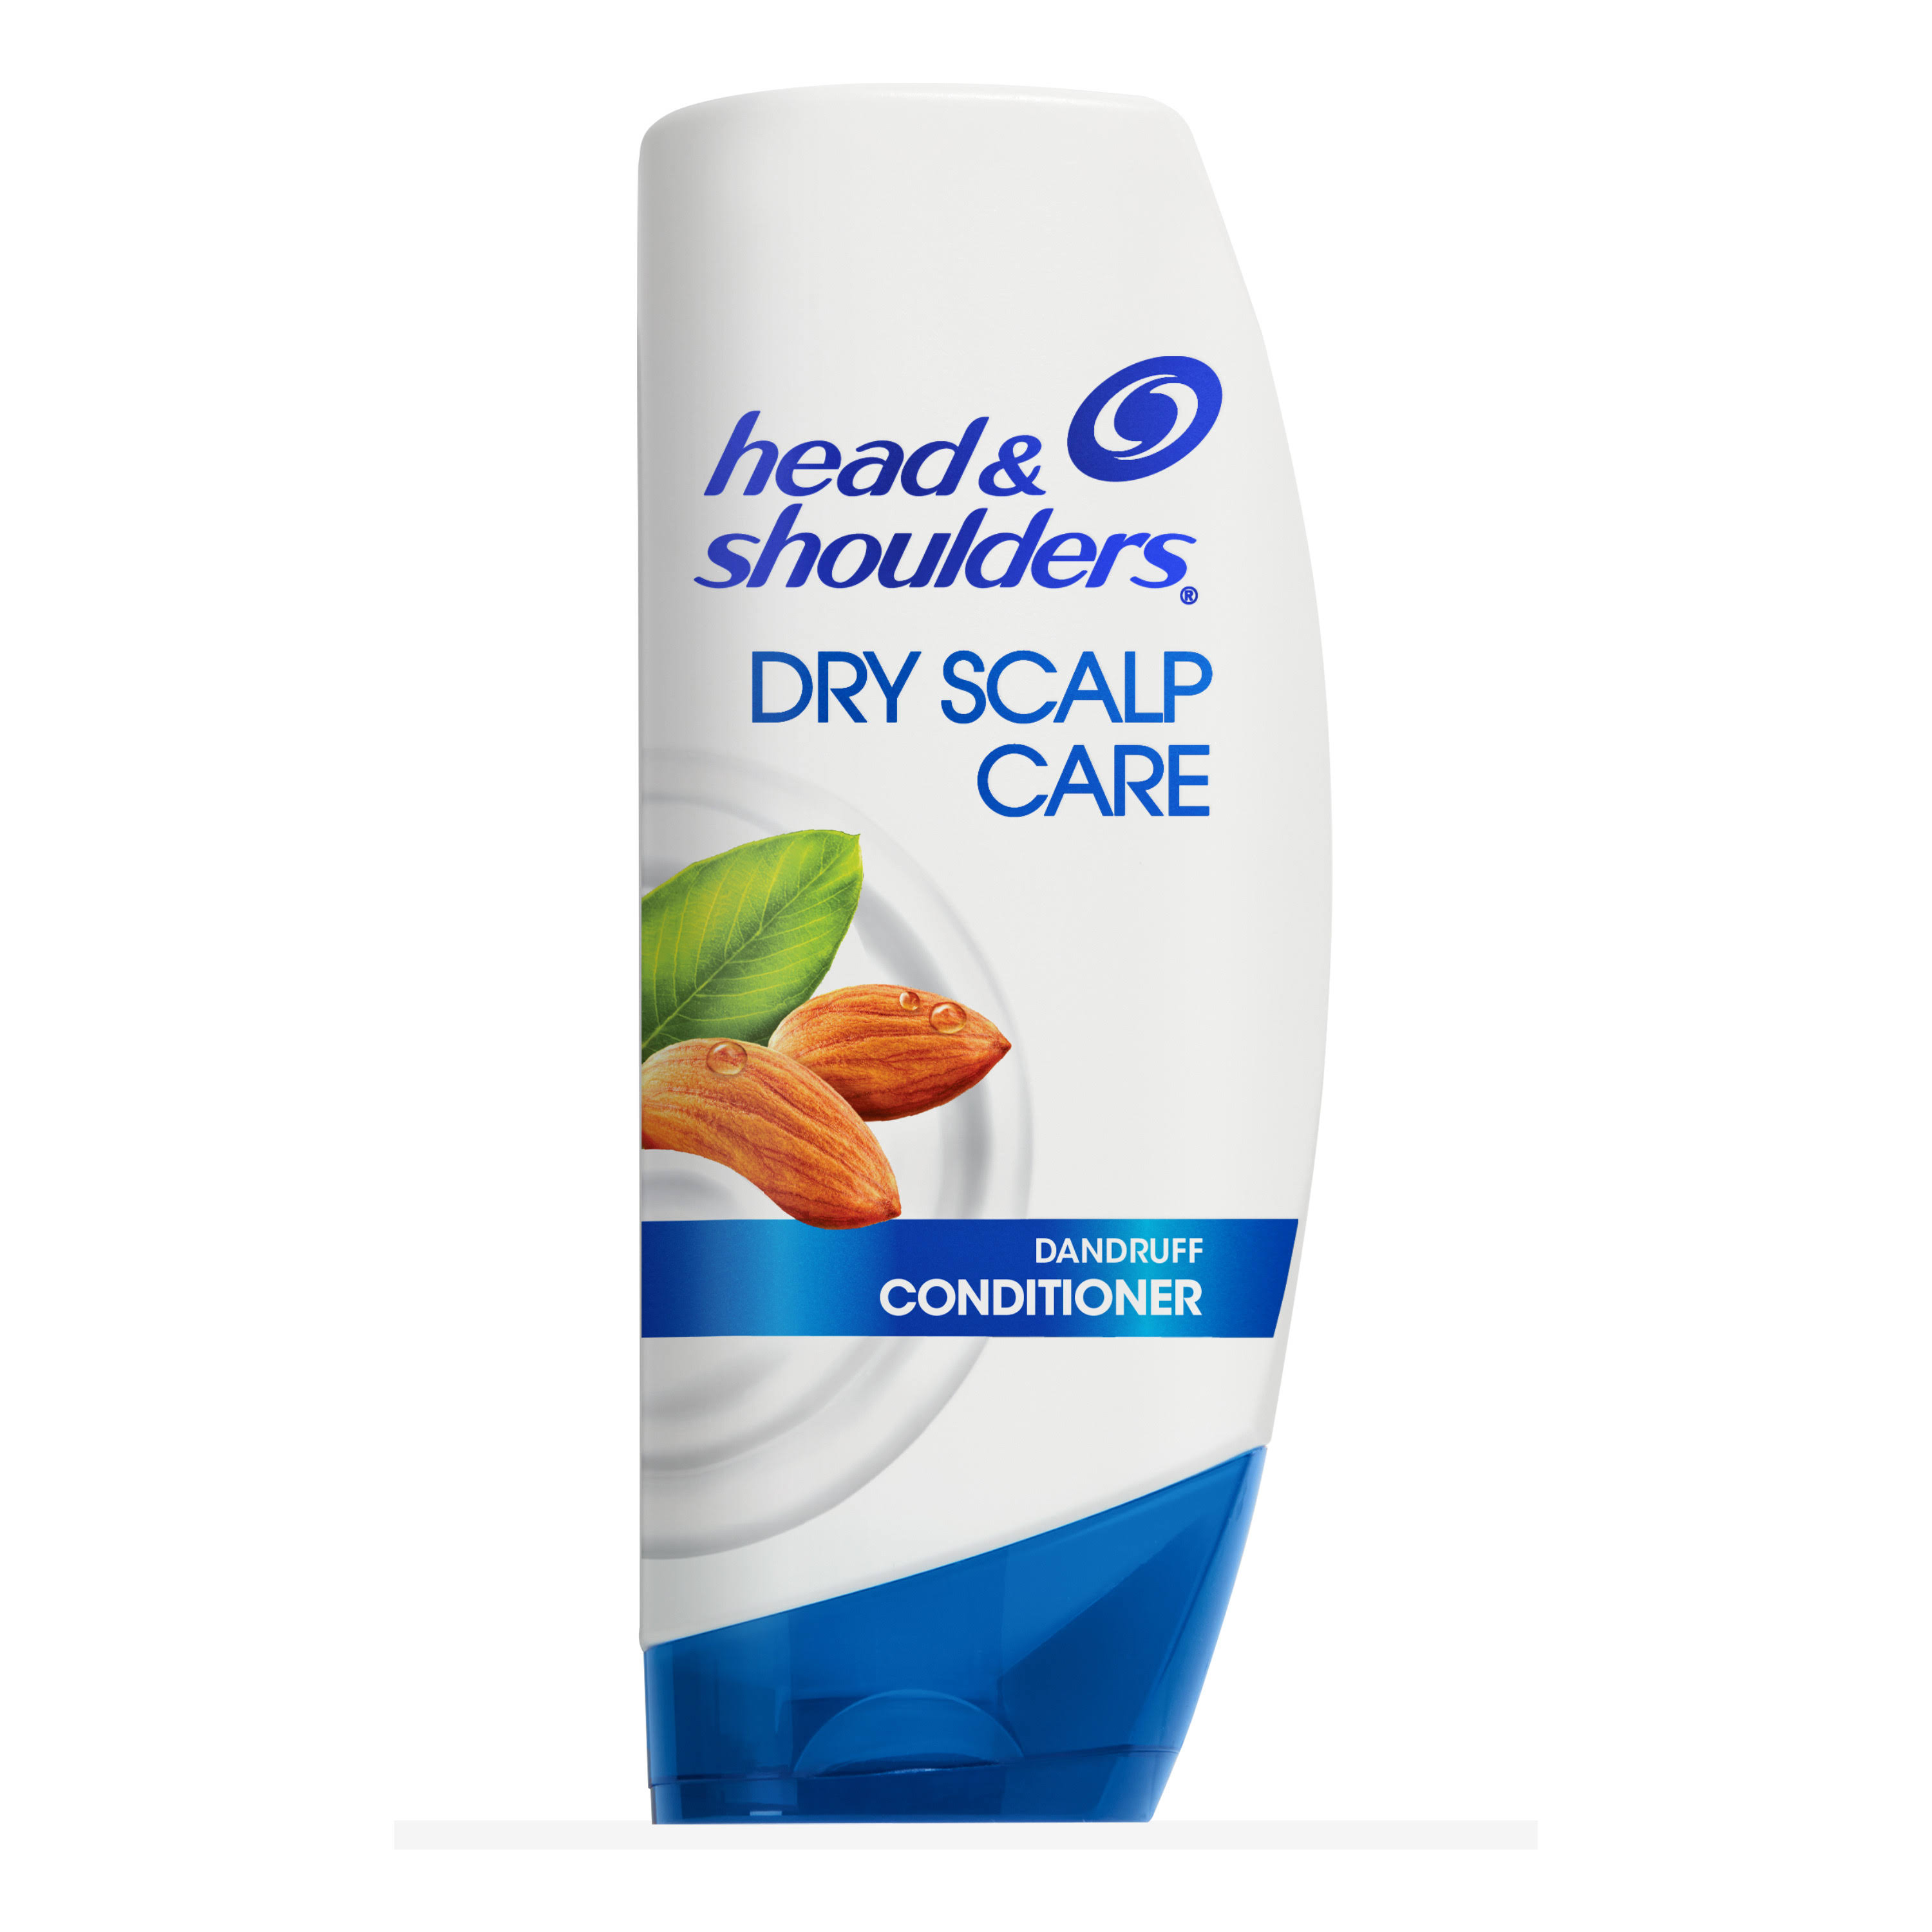 Head & Shoulders Dry Scalp Care Daily Hair & Scalp Conditioner, 21.9 oz